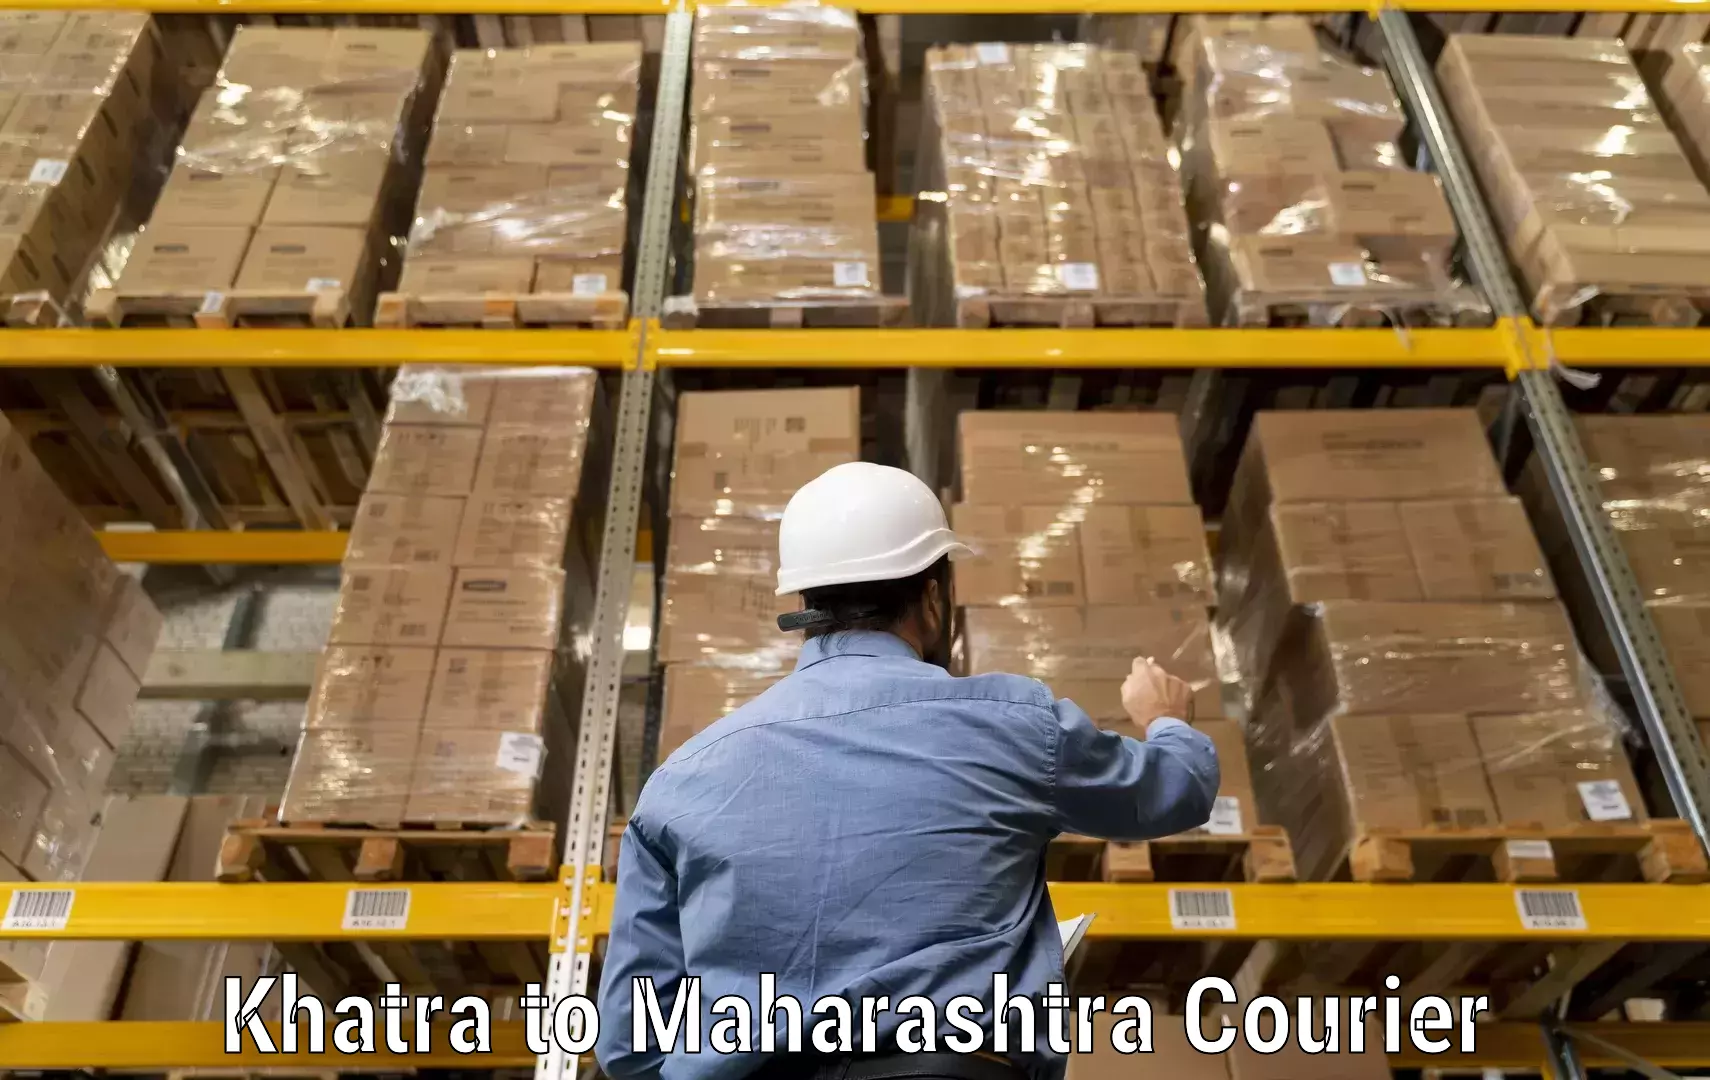 Professional courier handling Khatra to Dhule